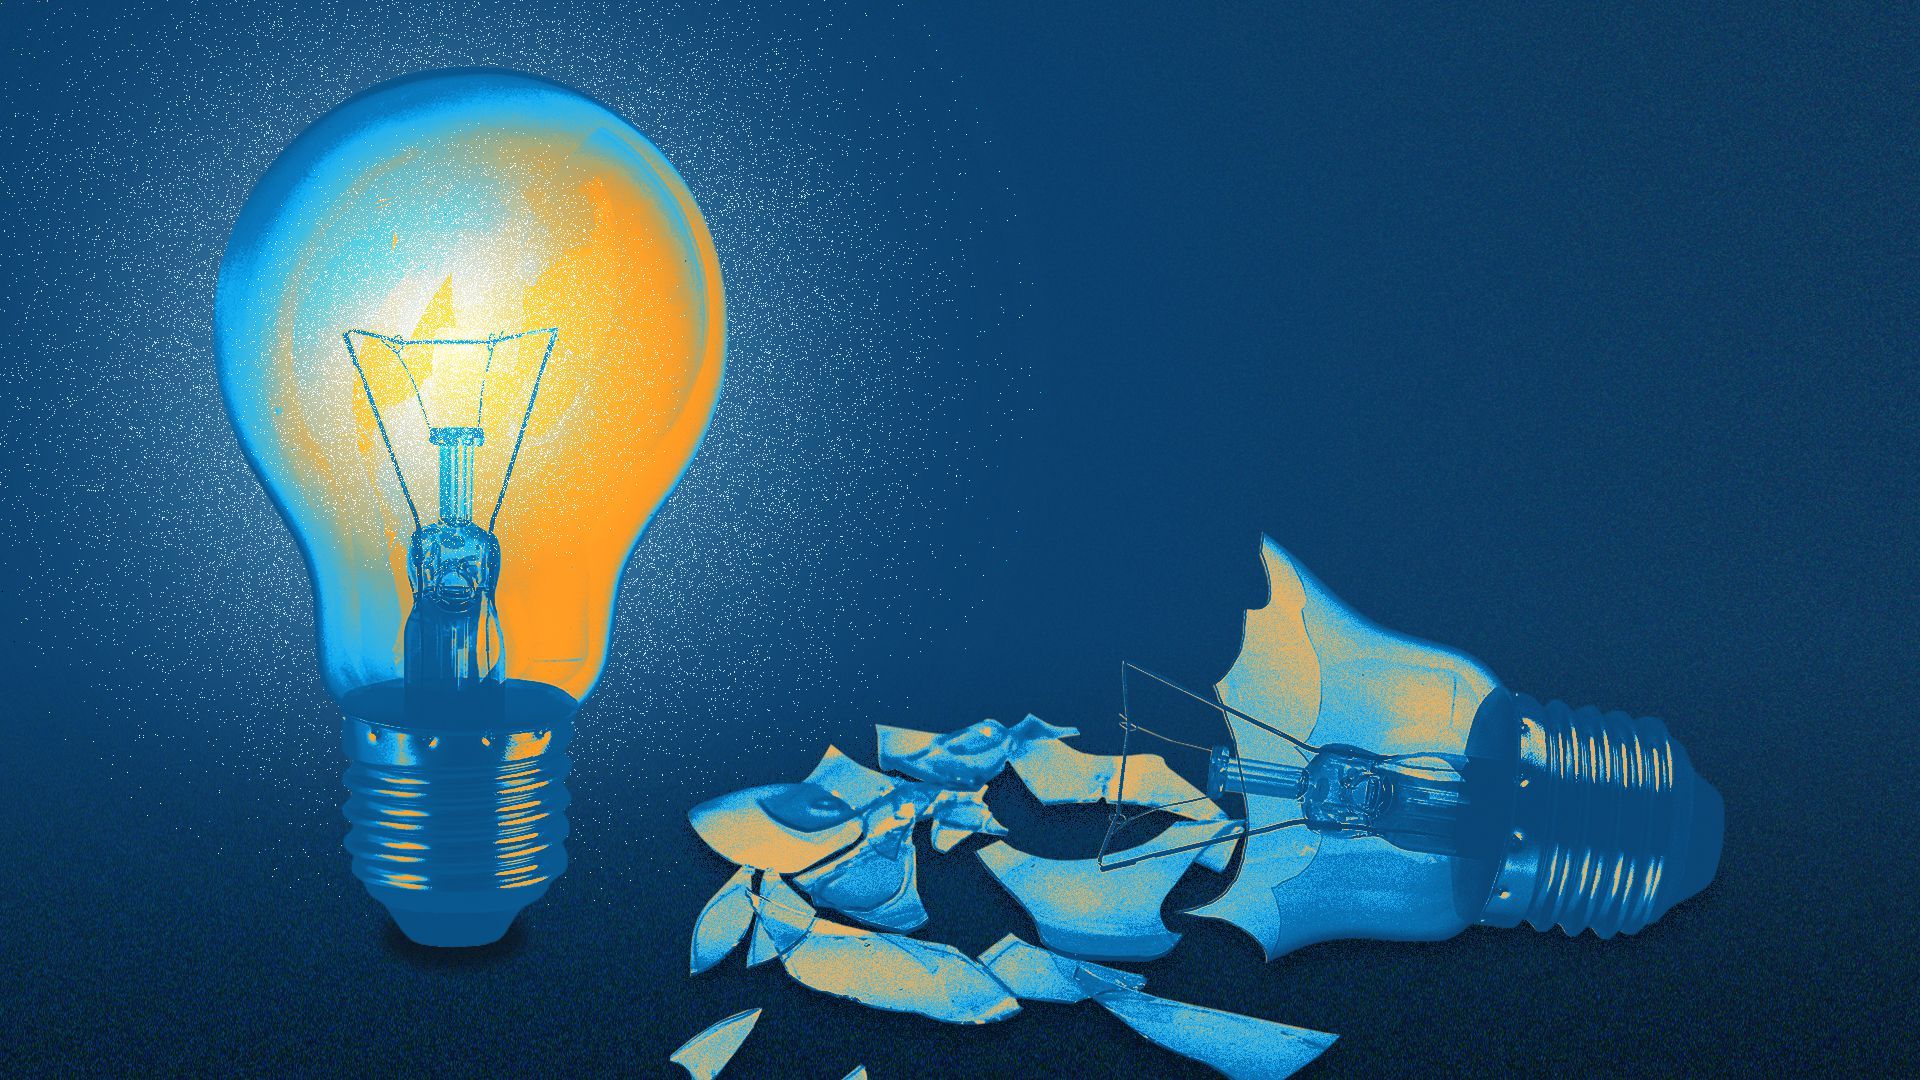 Illustration of a lit lightbulb standing next to a broken lightbulb, laying in pieces on the ground